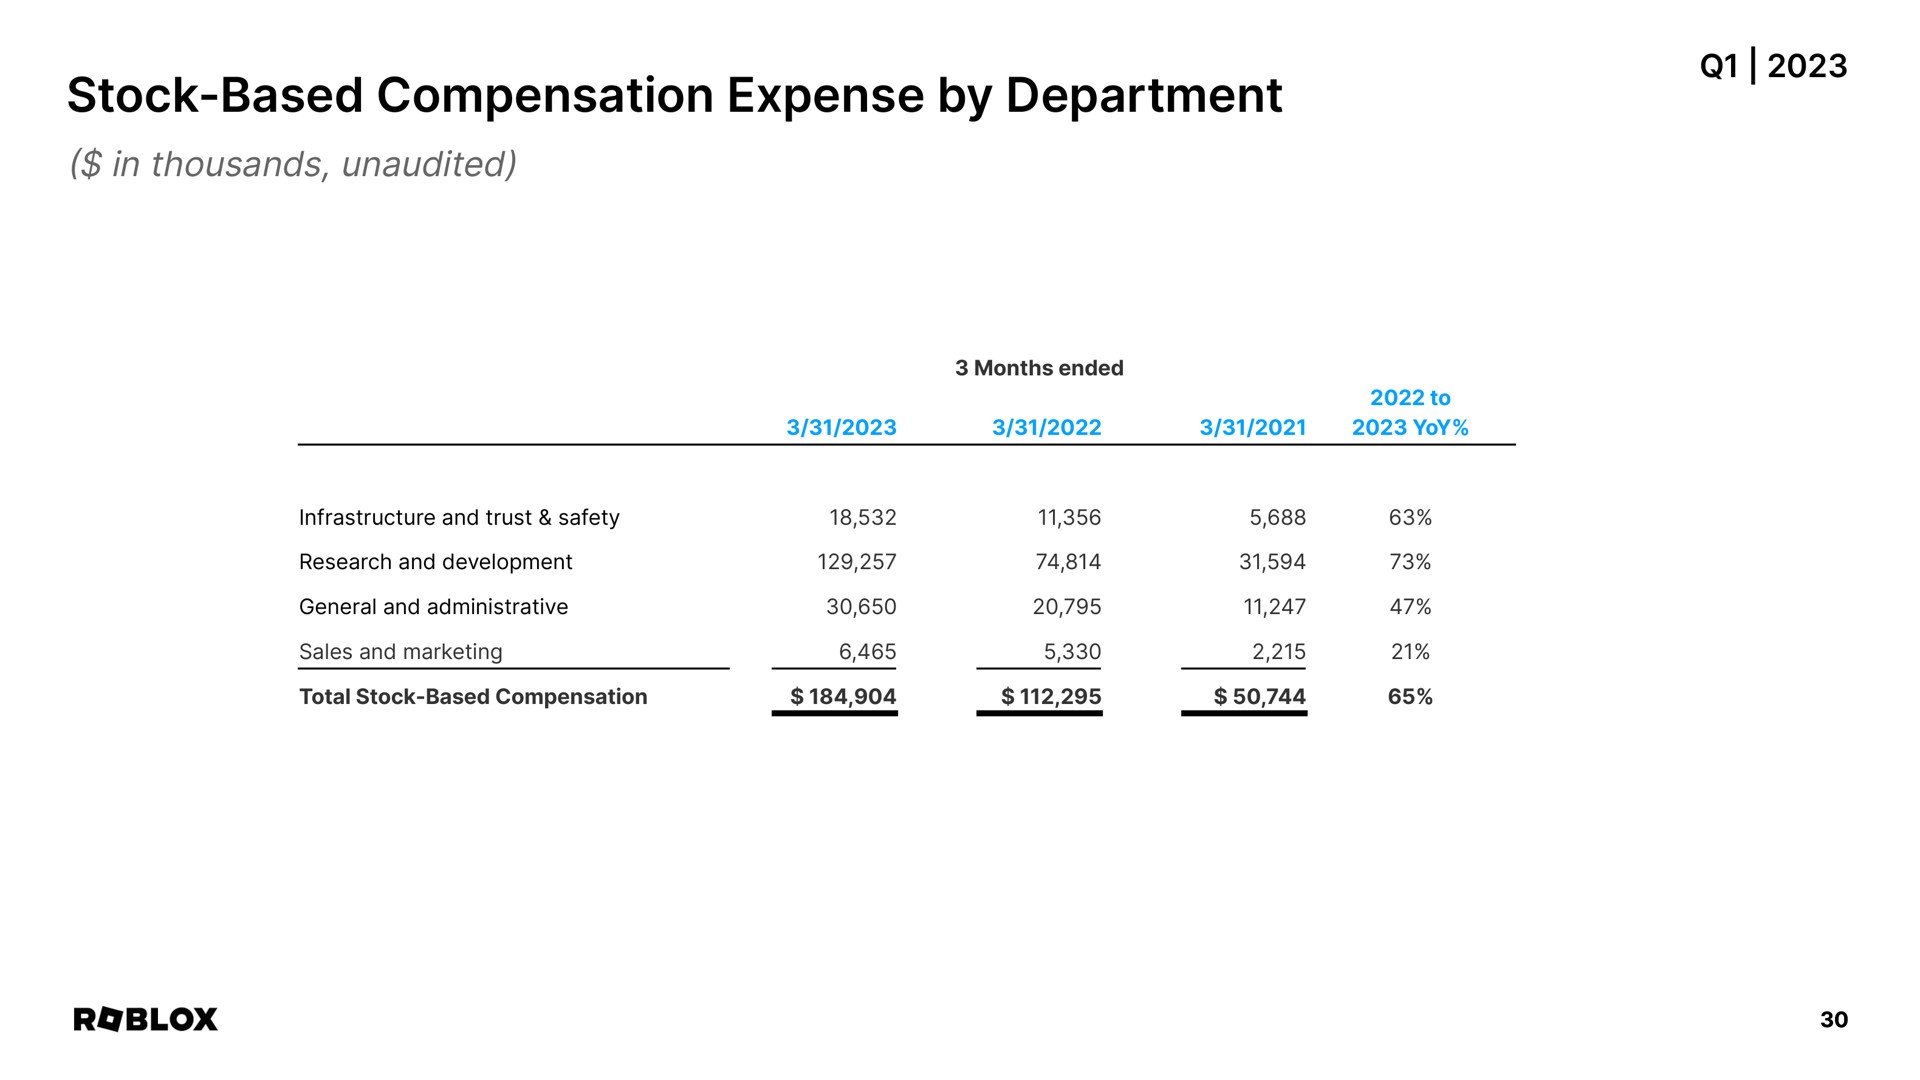 stock based compensation expense by department | Roblox